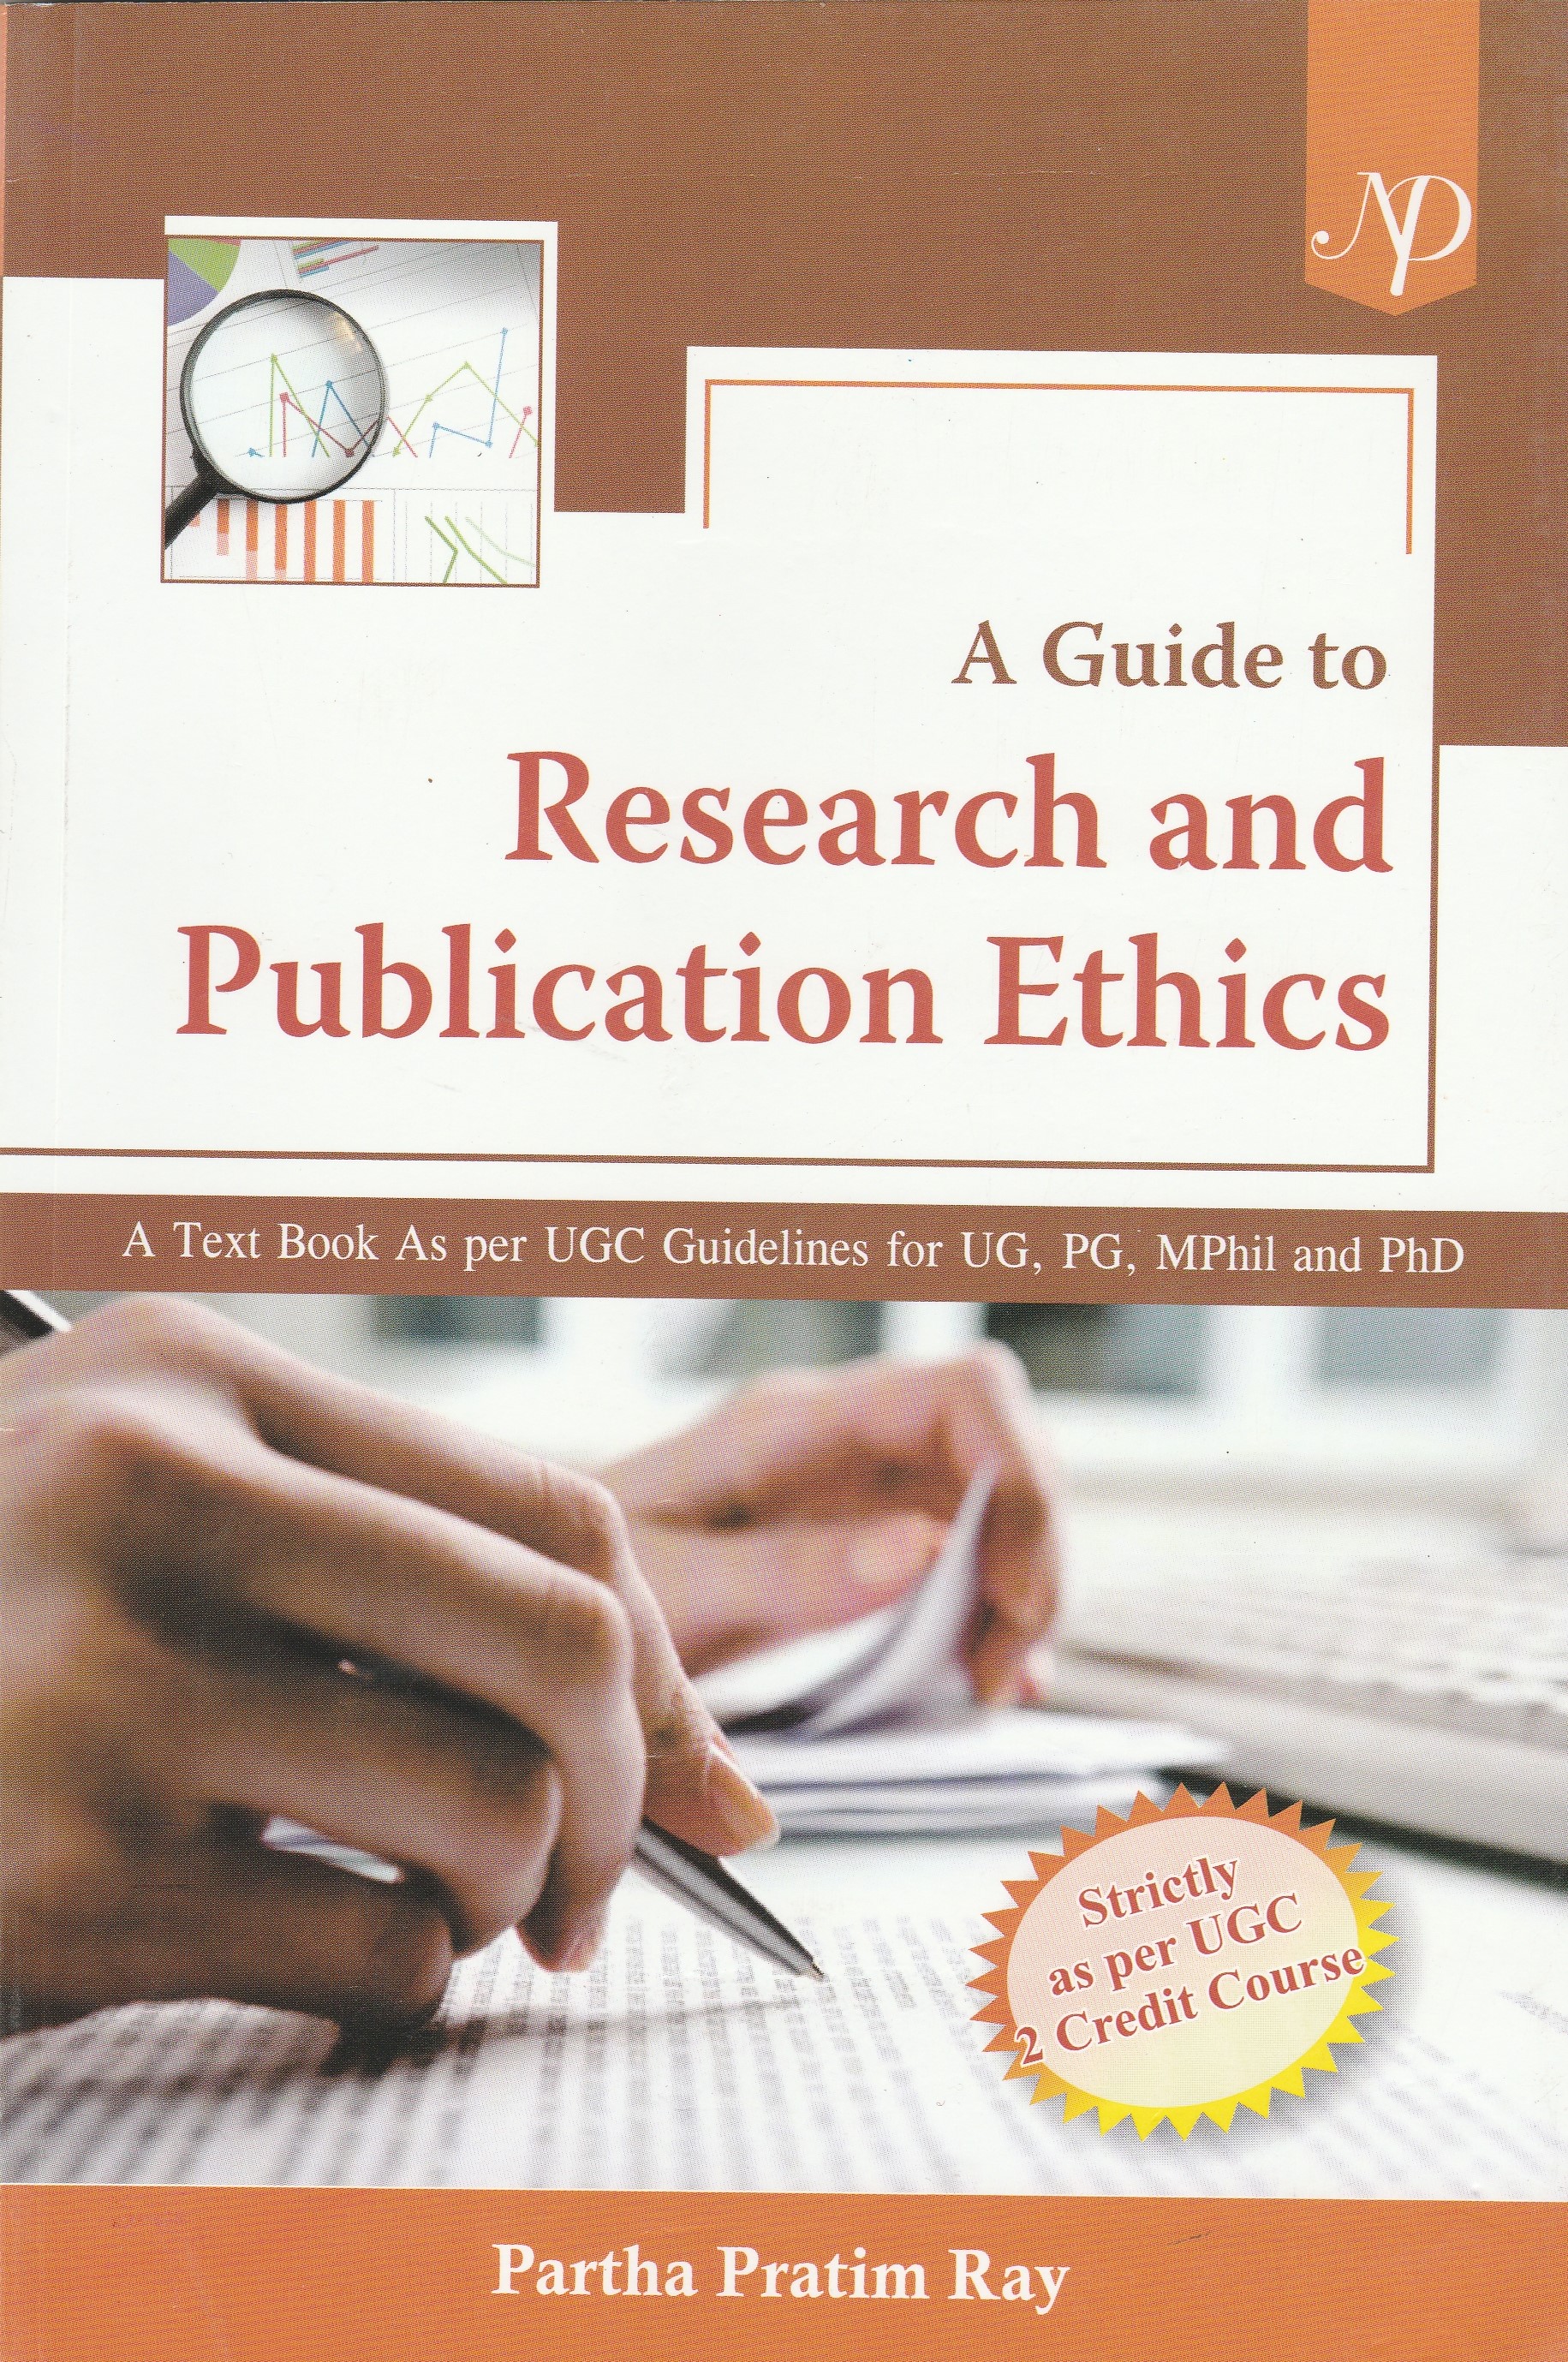 A Guide to Research and Publication Ethics